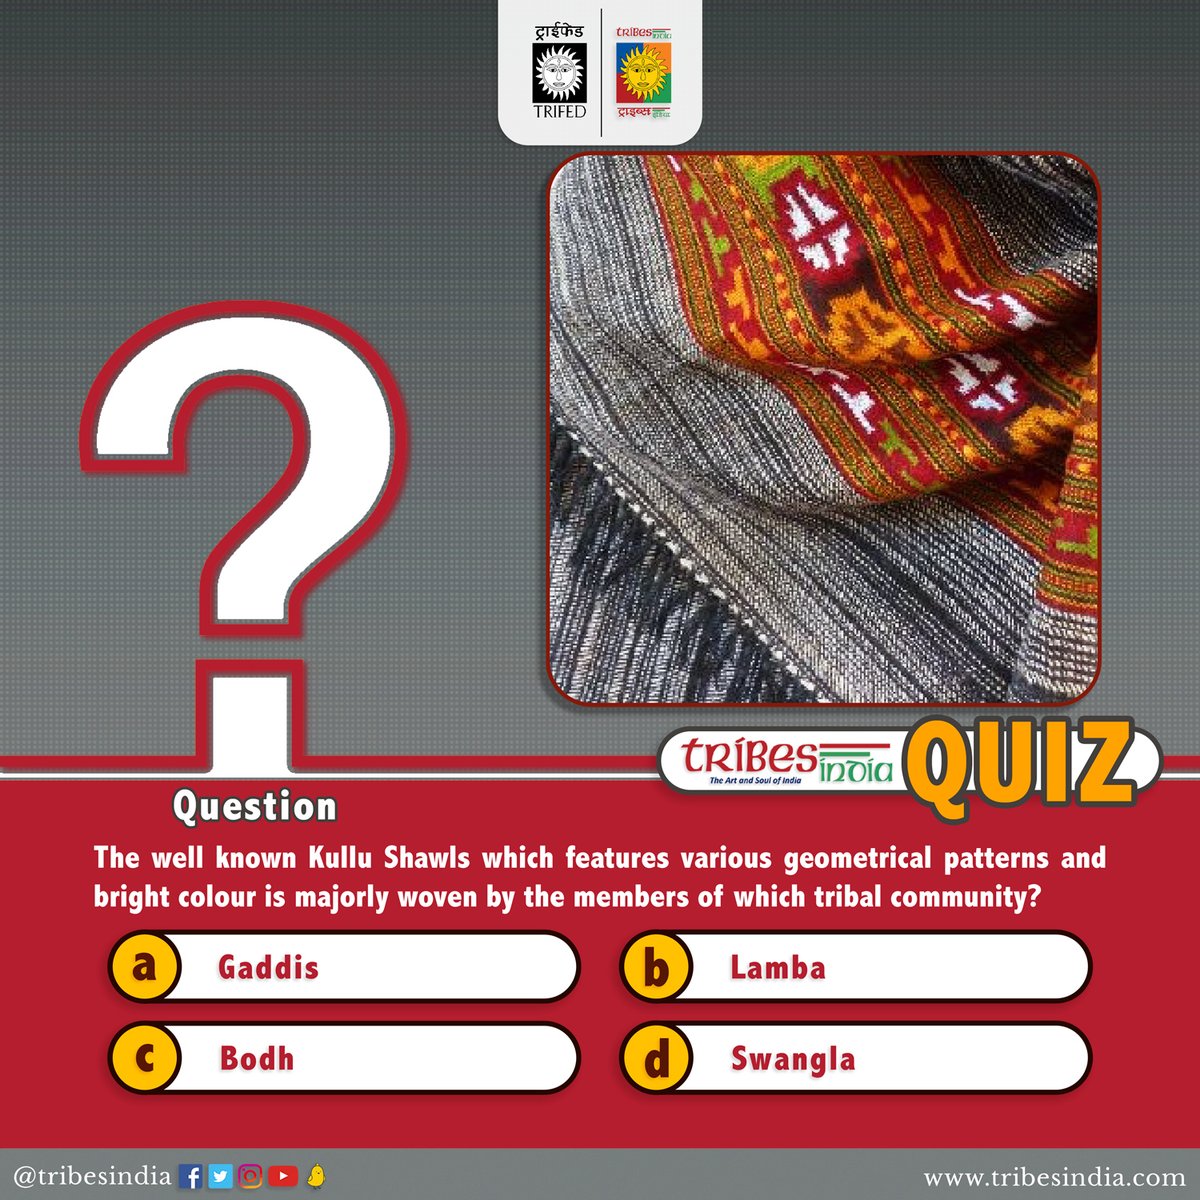 The well-known Kullu Shawls which features various geometrical patterns and bright colour is majorly woven by the members of which tribal community?. a)Gaddis b)Lamba c)Bodh d)Swangla Please respond with the correct option👇. #Vocal4Local #BuyTribal #QuizTime